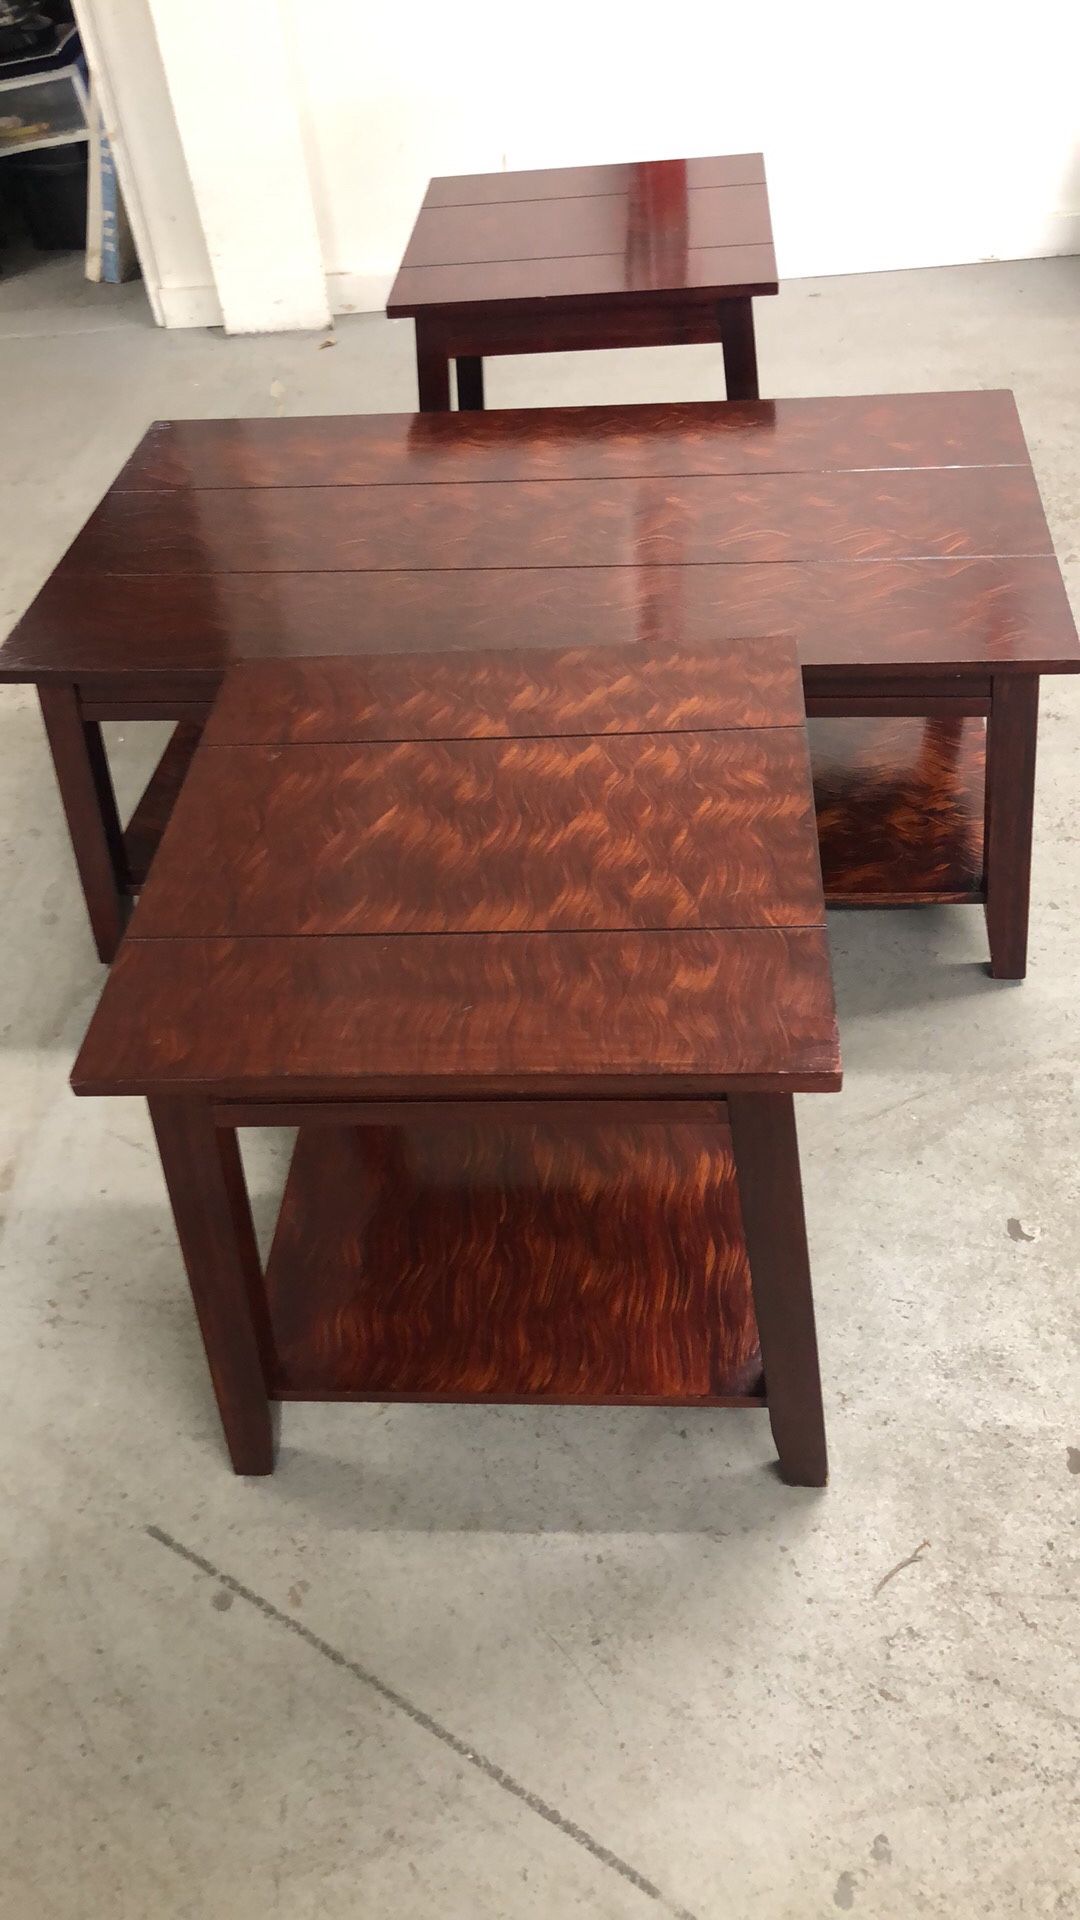 2 end tables with coffee table very good condition